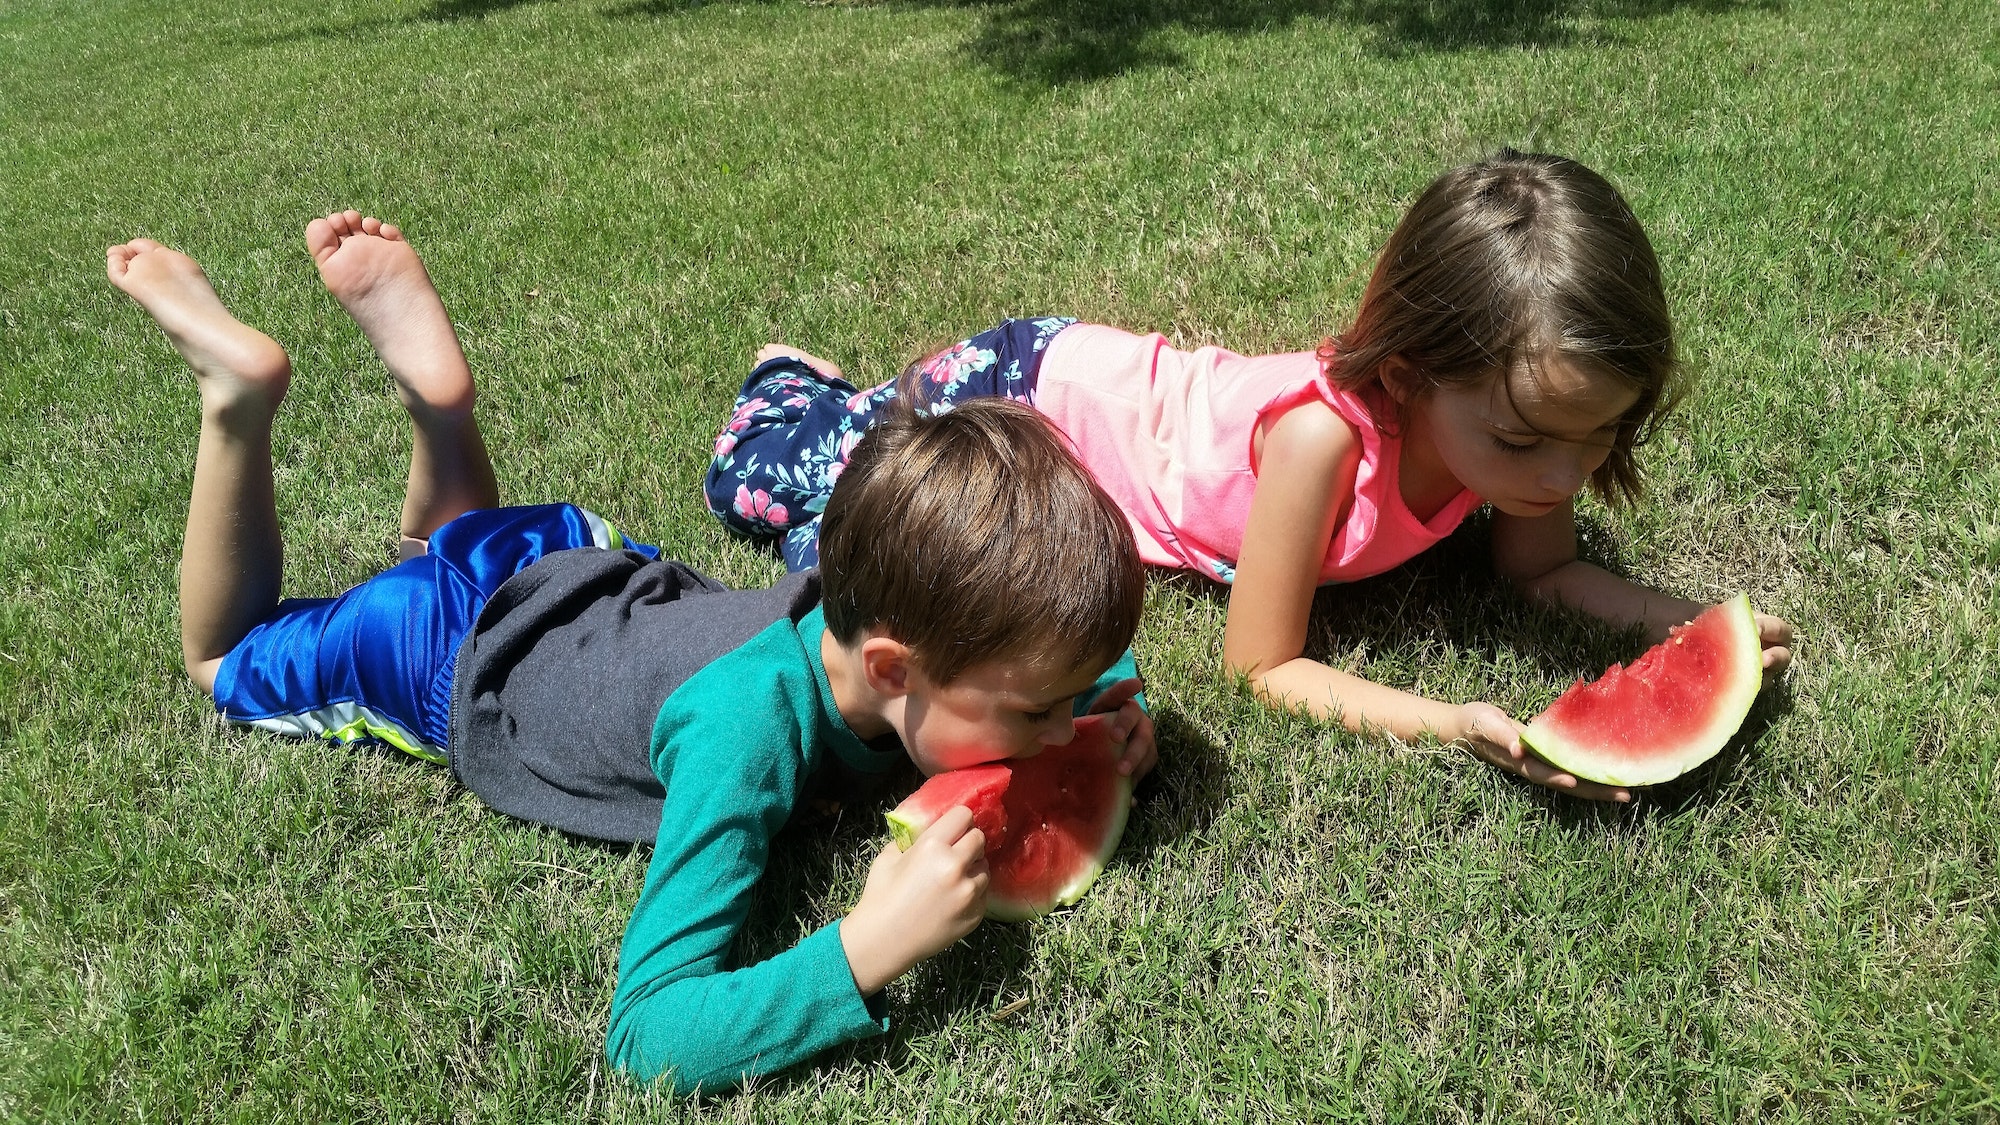 Generation z kids in fron yard staying safe from covid and enjoying a cool refreshing watermelon.